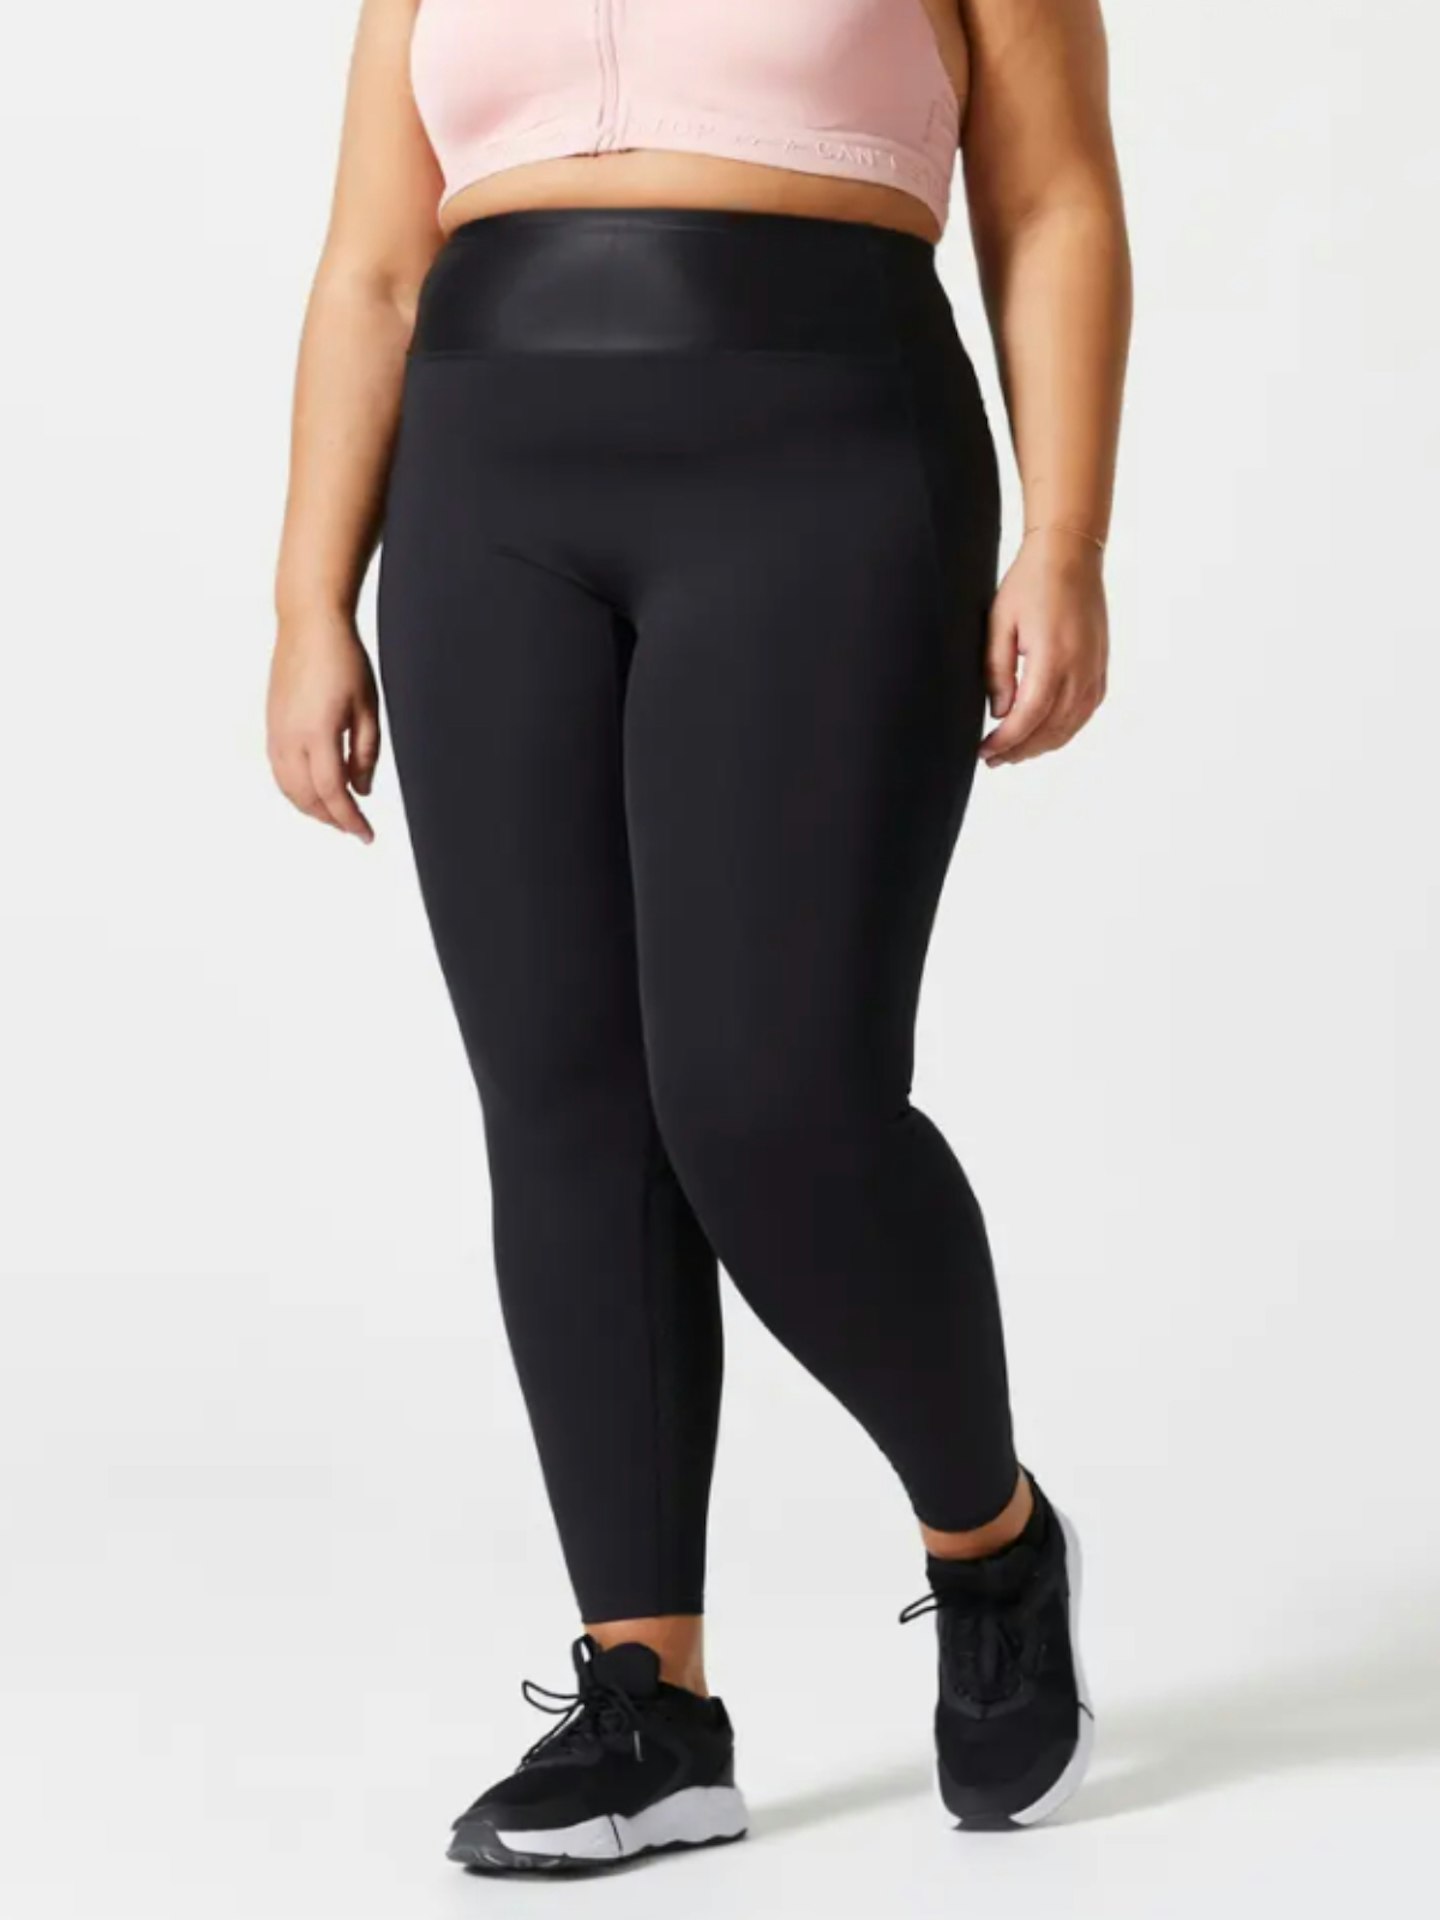 Women's Cardio Fitness High-Waisted Shaping Plus-Size Leggings